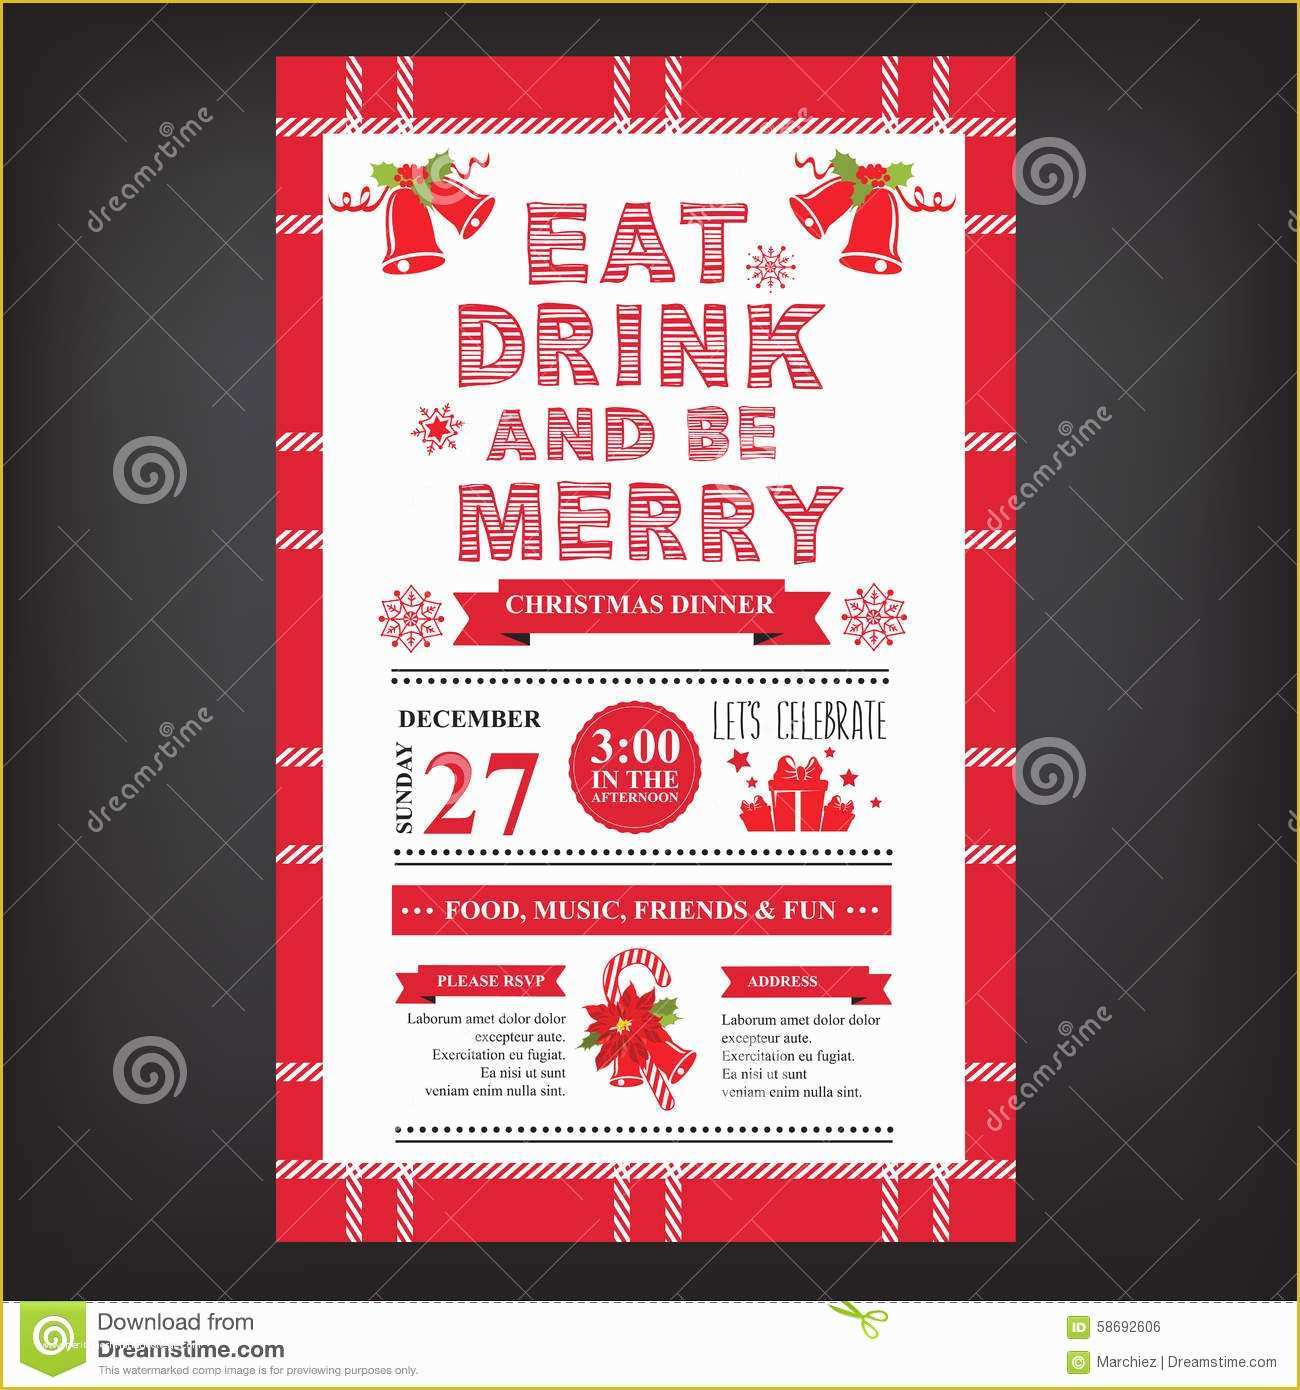 Menu Poster Template Free Of Christmas Restaurant and Party Menu Invitation Stock